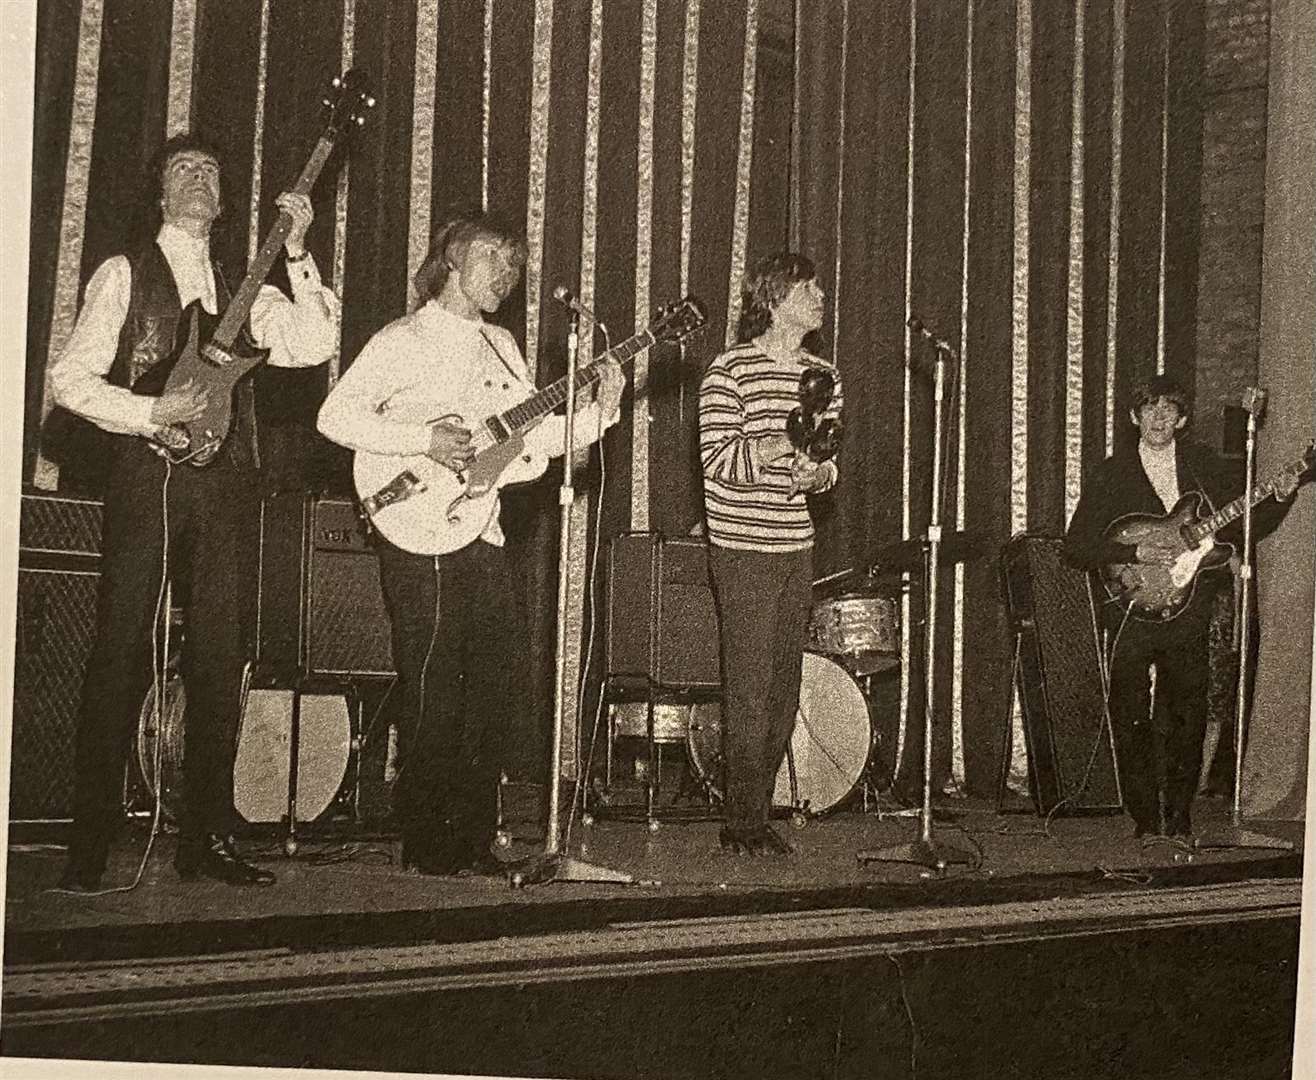 The Rolling Stones playing in a different part of the county at Odeon Cinema in Folkestone 1964. Photo: Alan Taylor Lost Folkestone